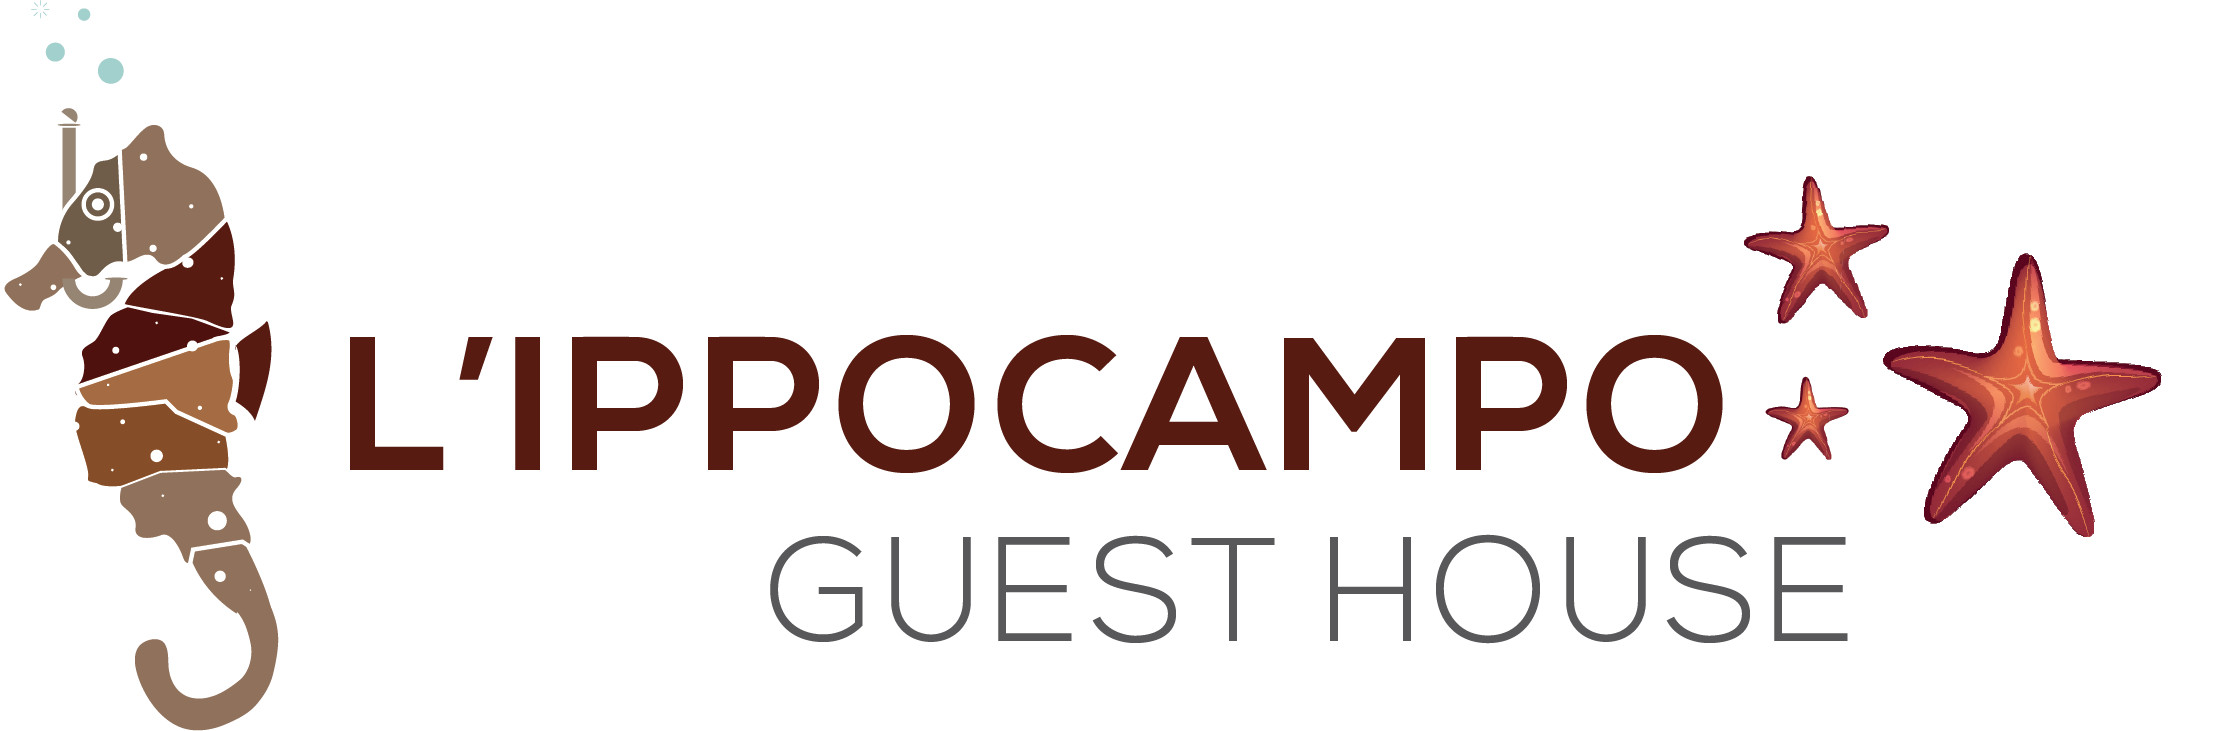 L'ippocampo Guest House